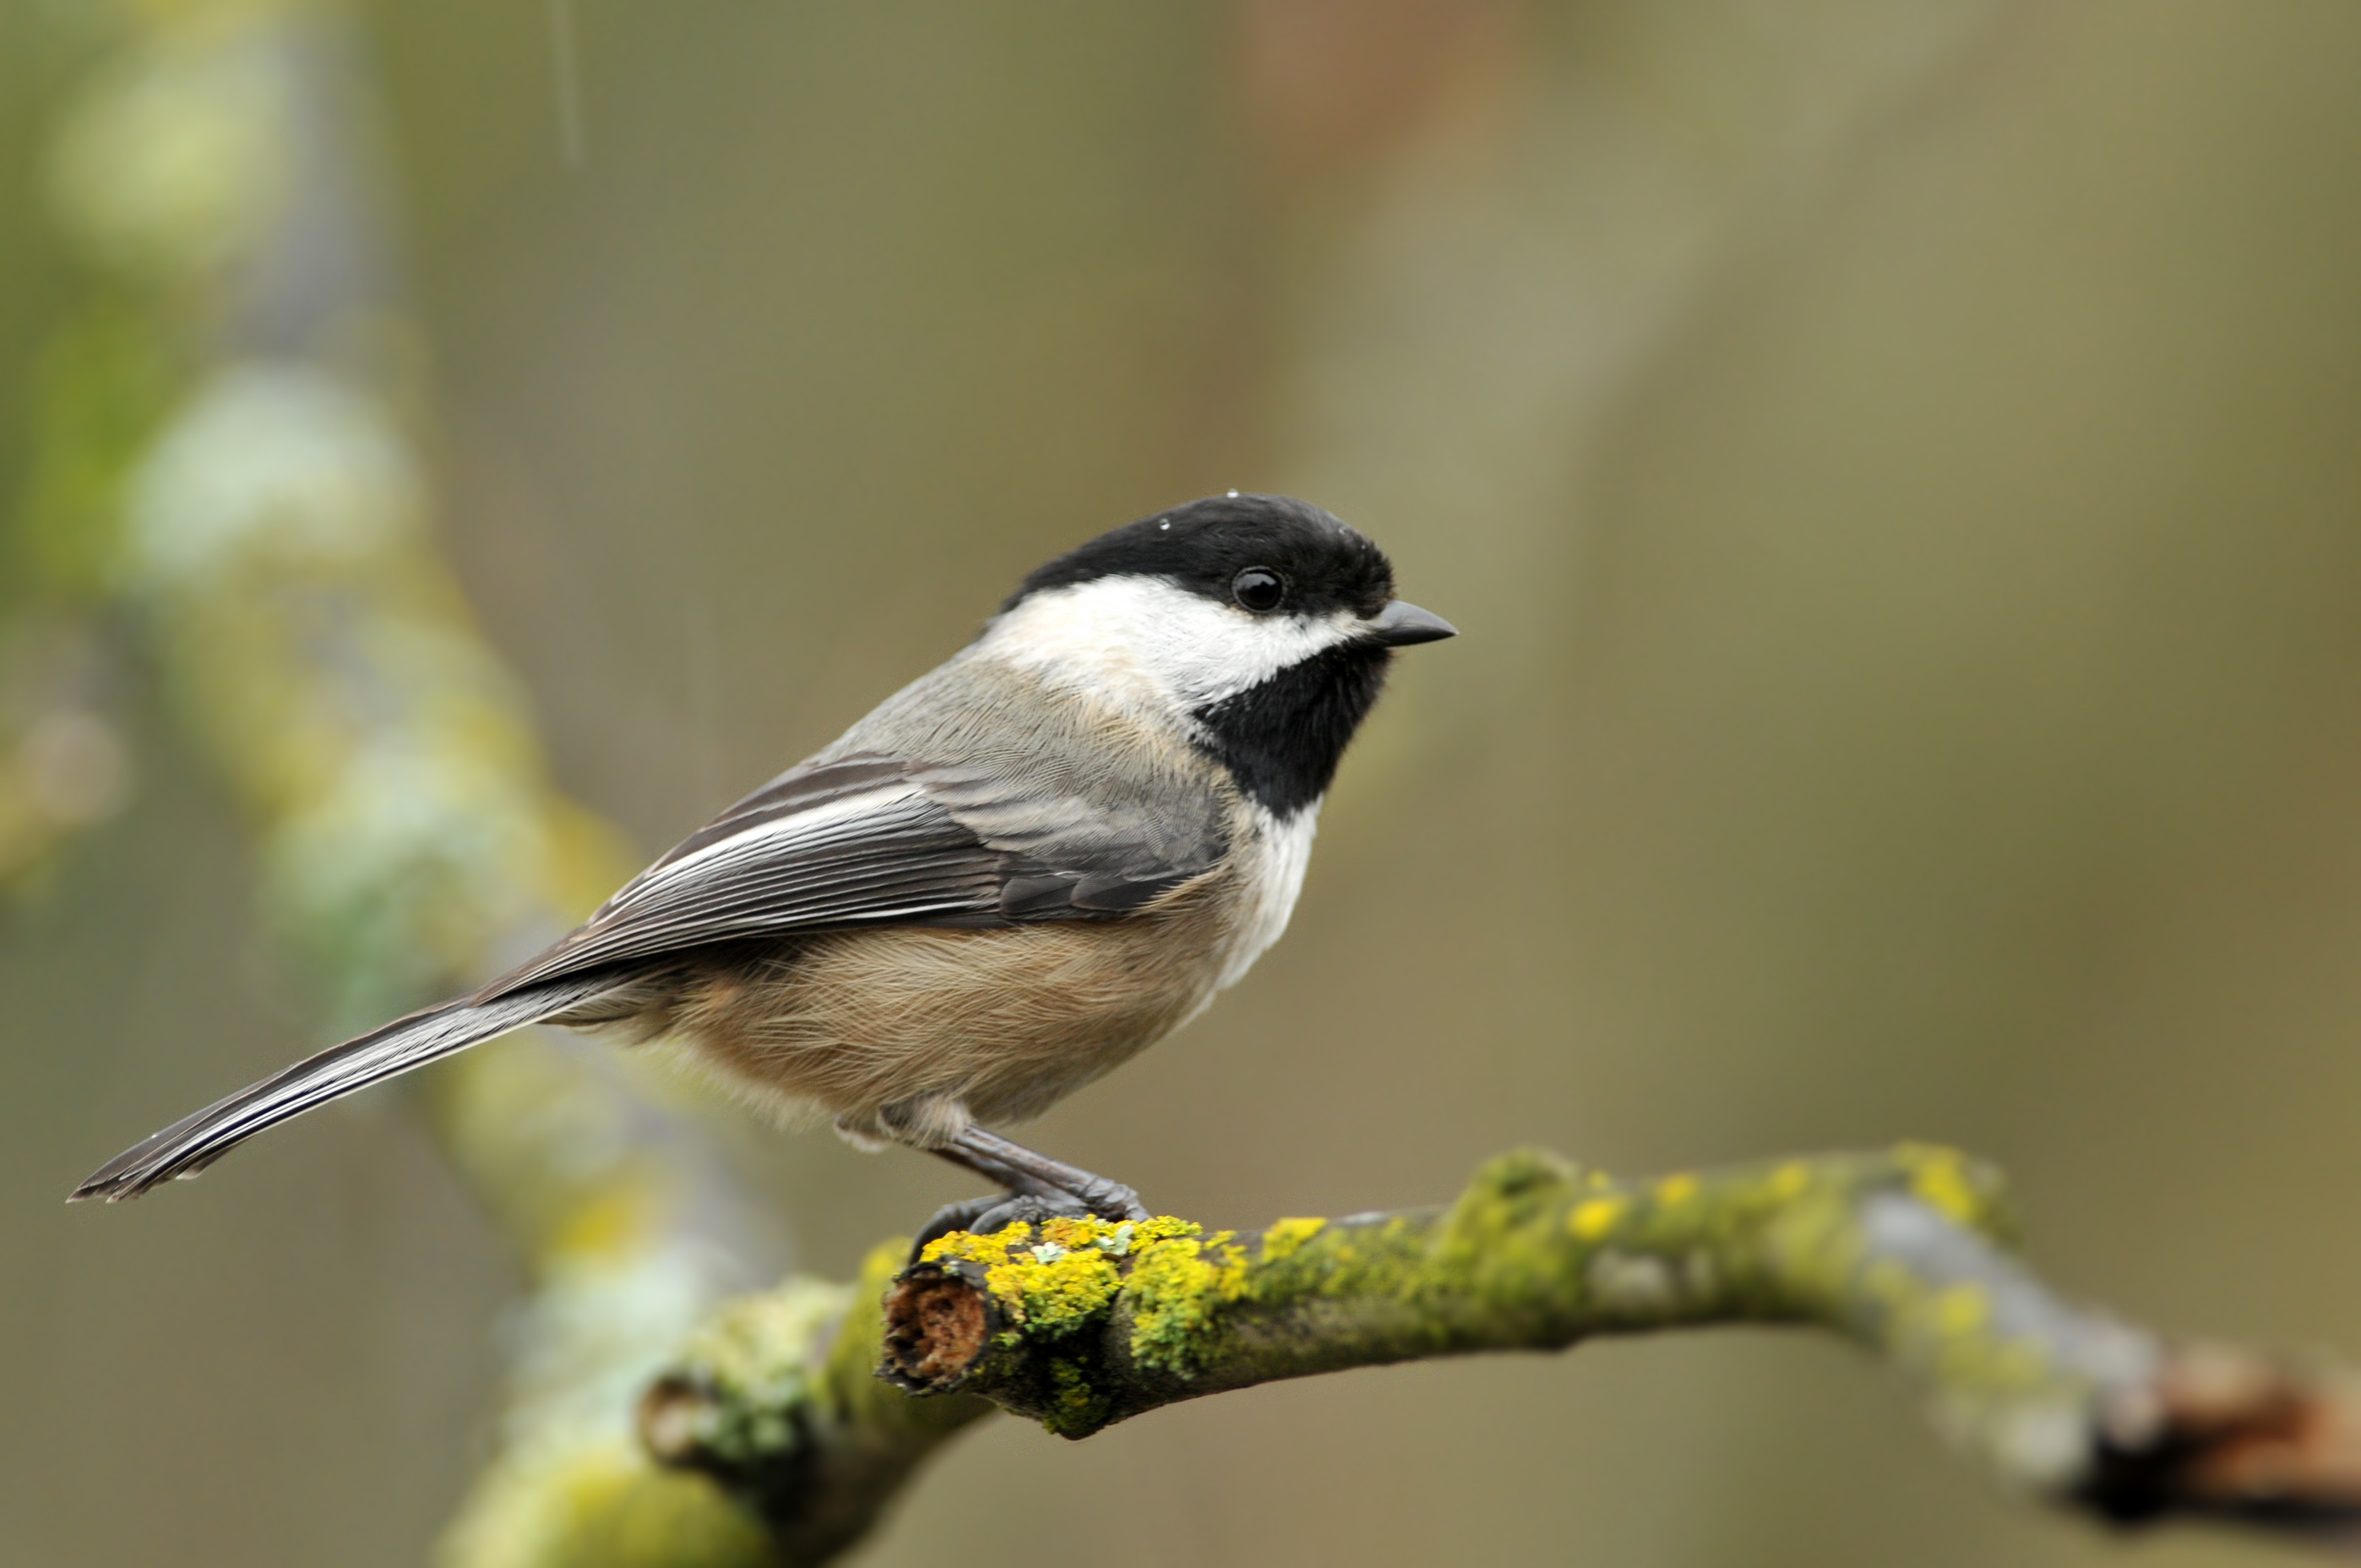 Black capped chickadee sits on a tree branch in the rain